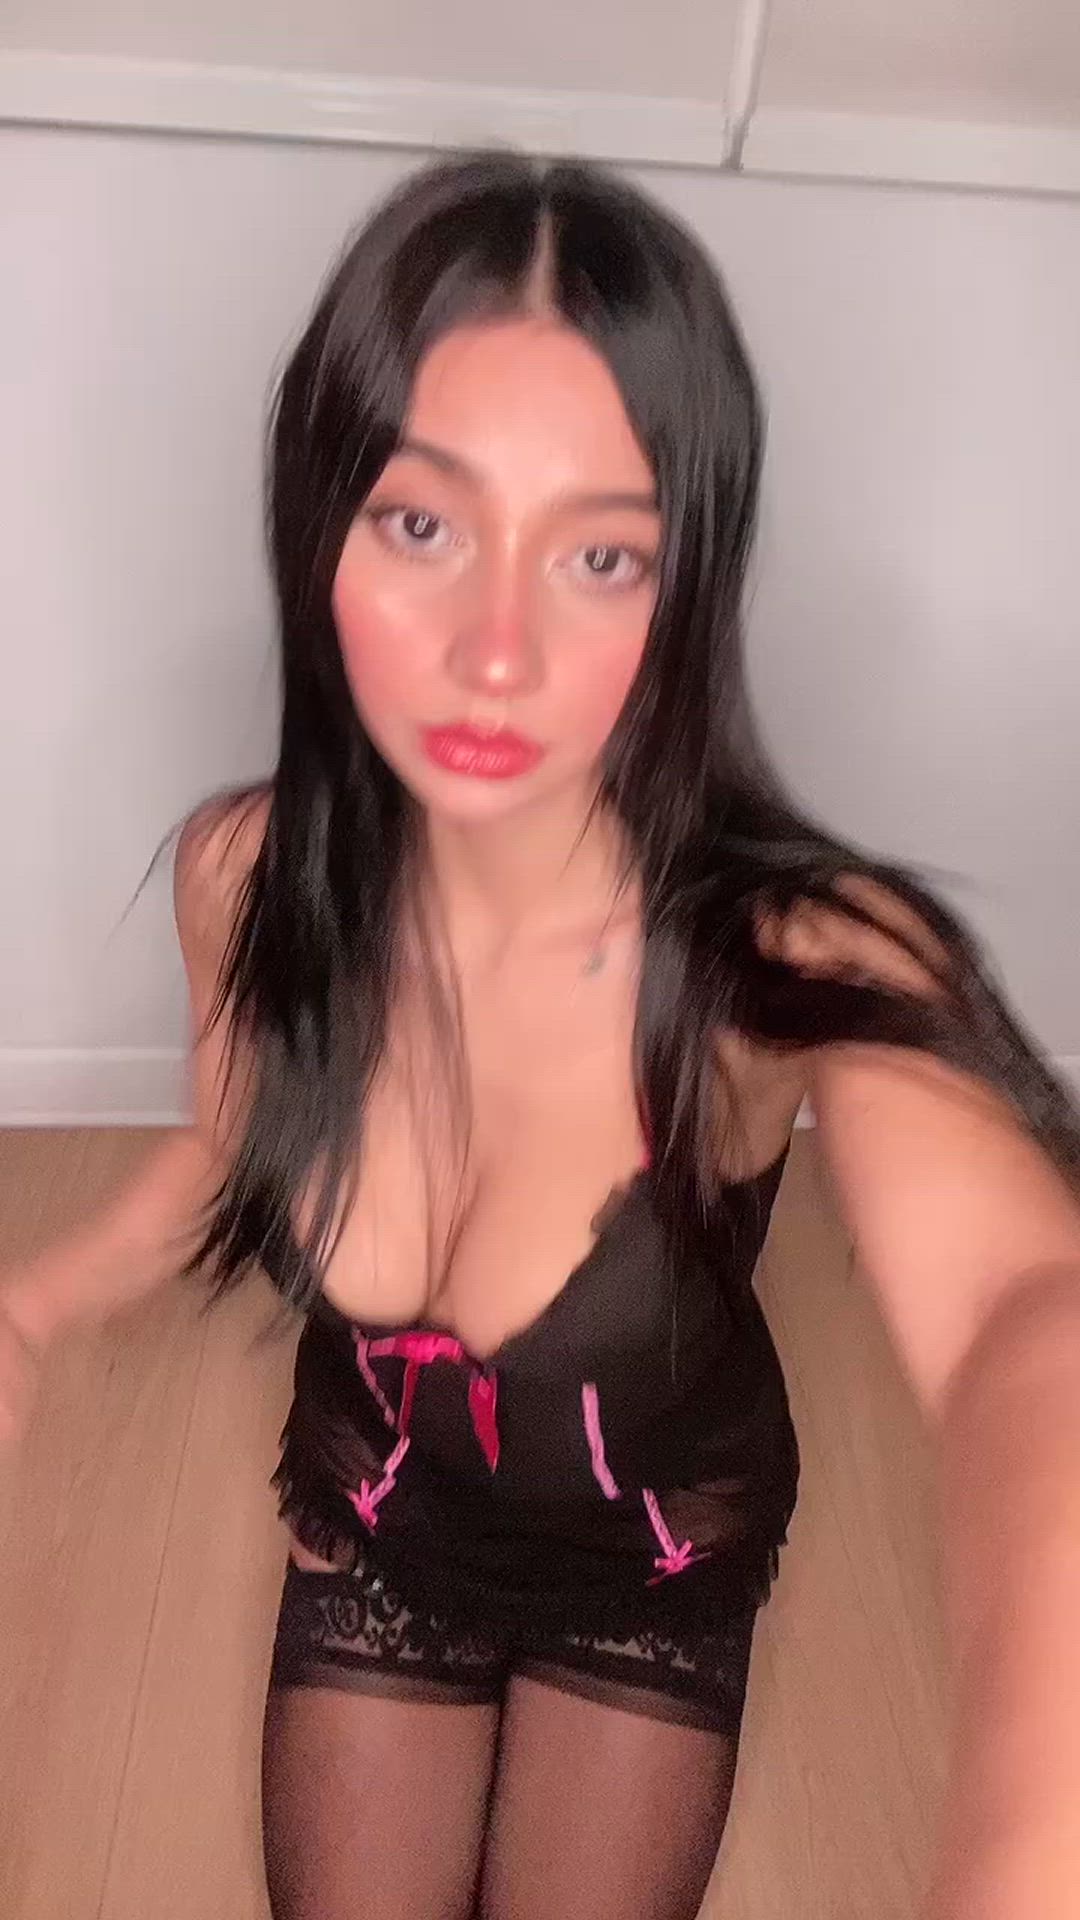 Latina porn video with onlyfans model notvictoria <strong>@vickyvelez</strong>